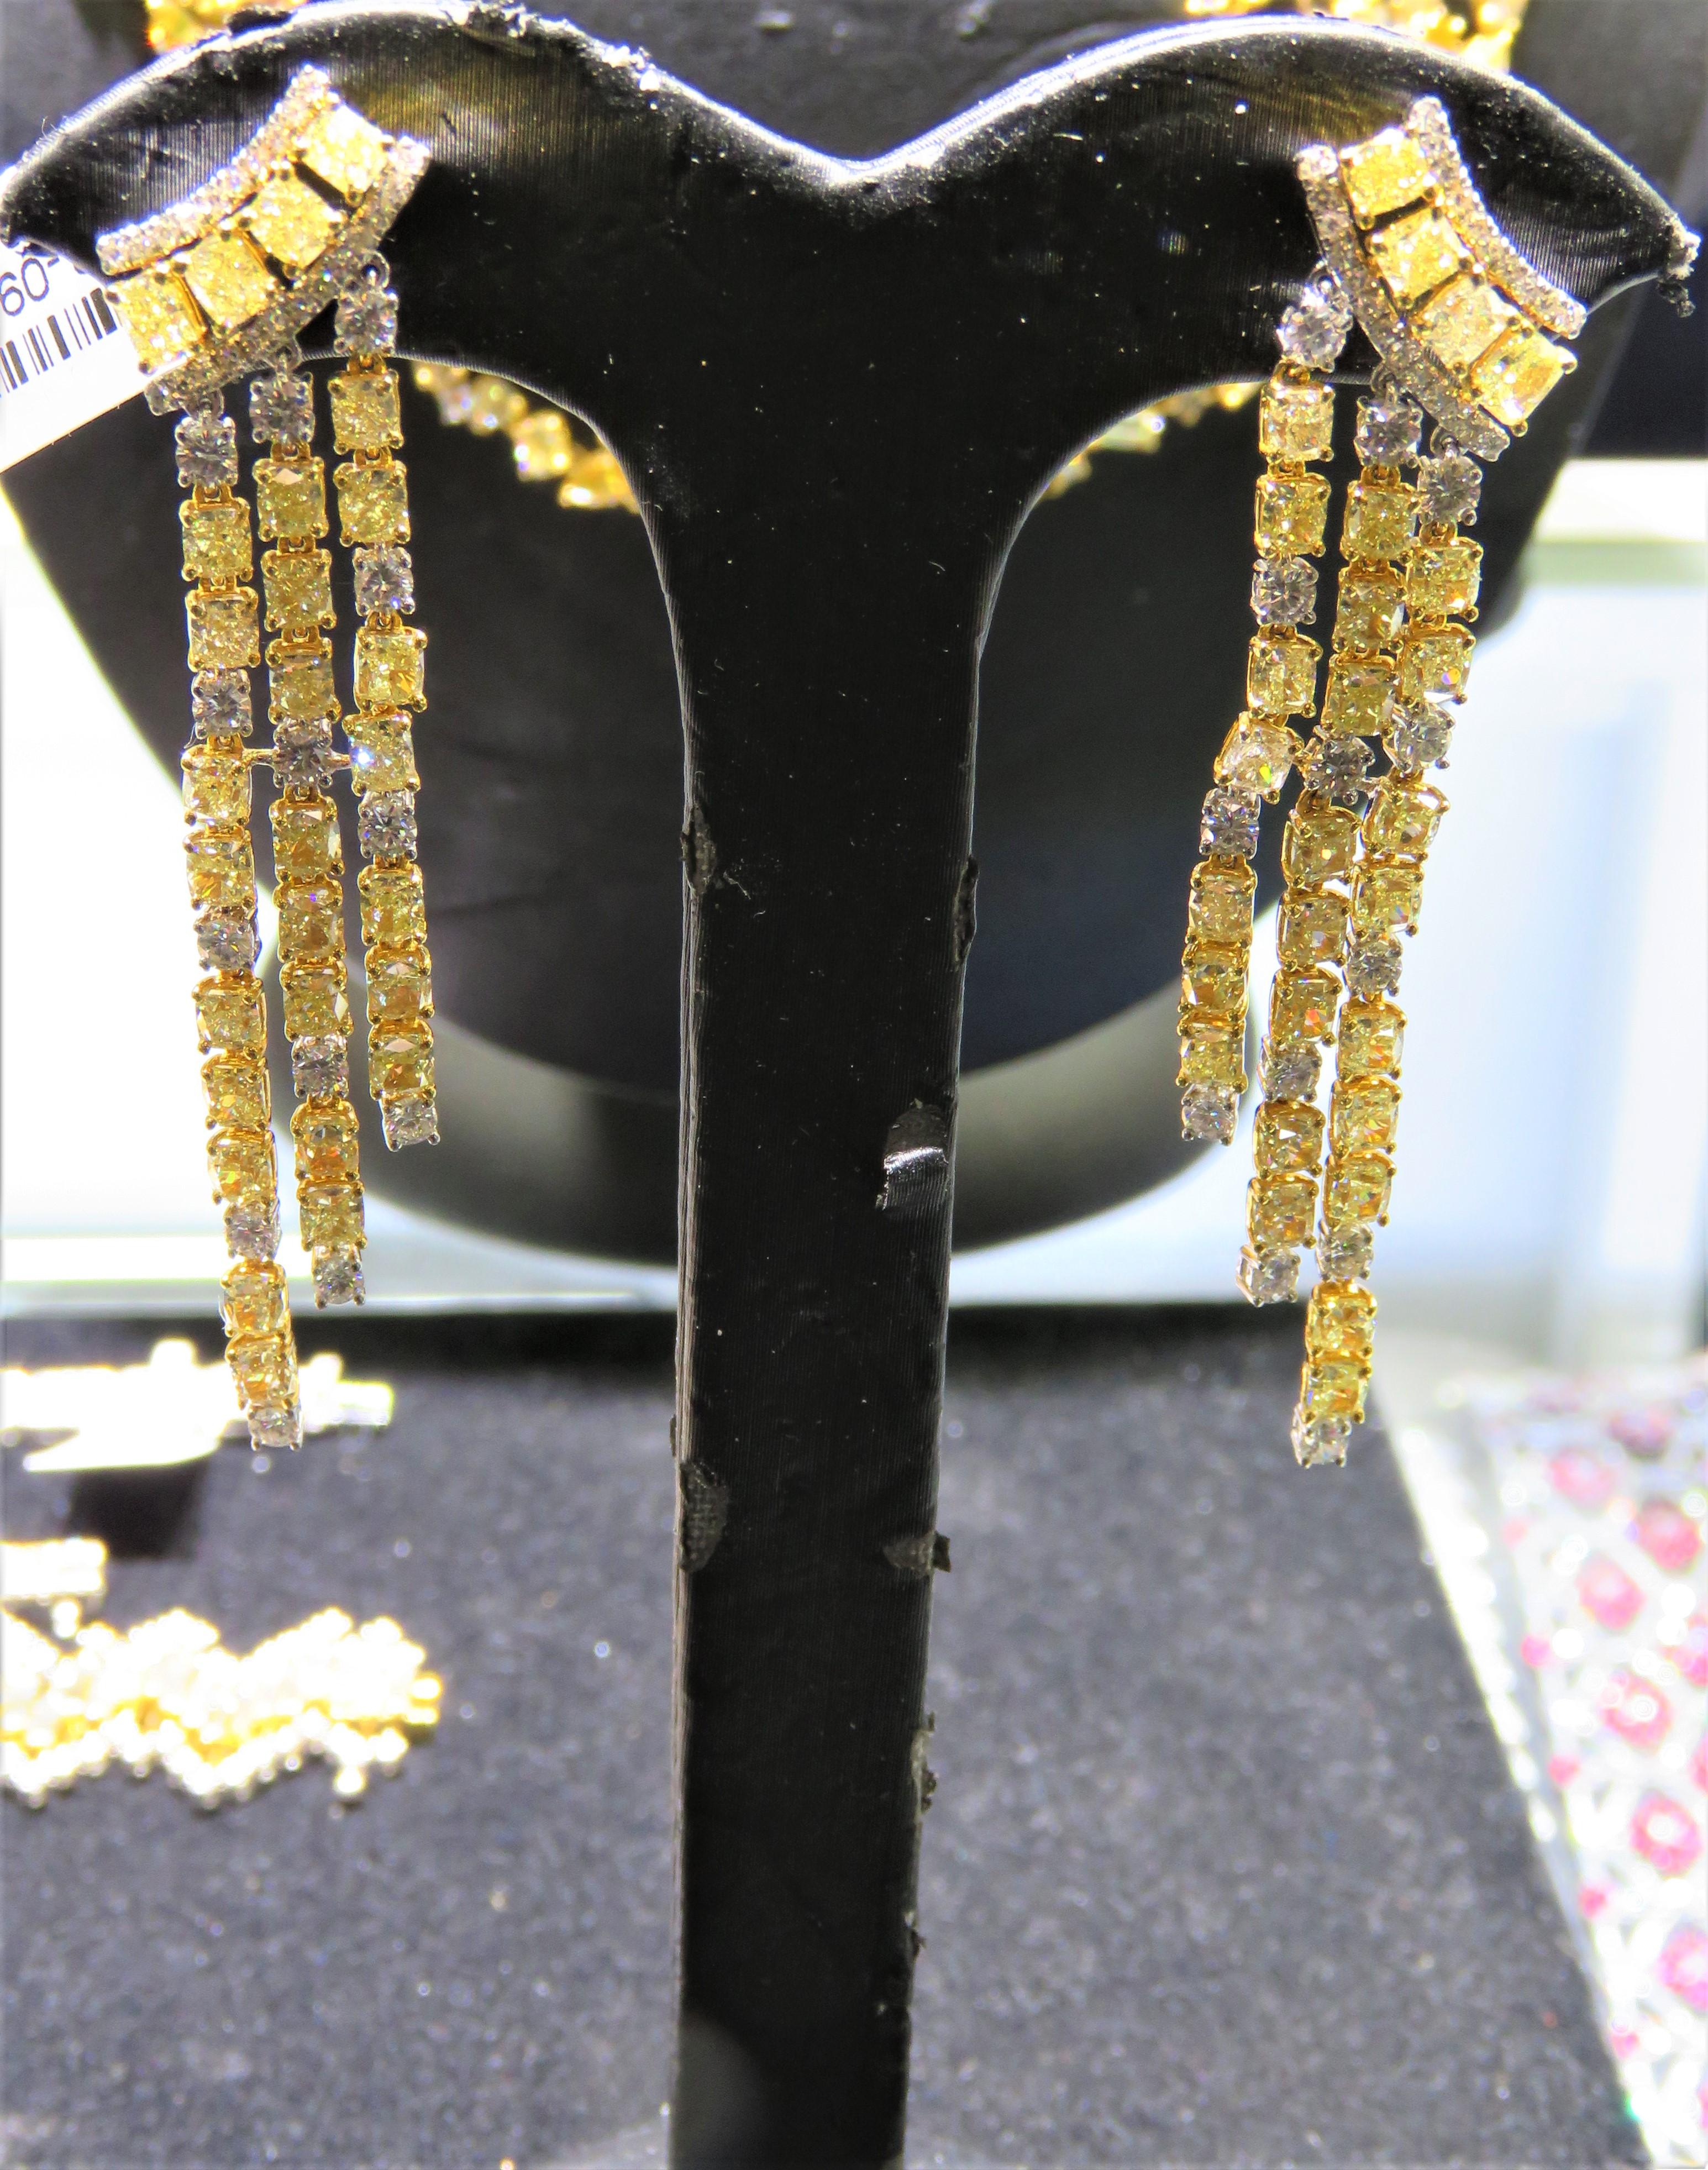 The Following Item we are offering are these Extremely Rare Beautiful 18KT Gold Fine Large Fancy Yellow and White Diamond Dangle Earrings. Each Earring features Rare Gorgeous Glittering Fancy Yellow Diamonds Draped with Sparkling White Diamonds